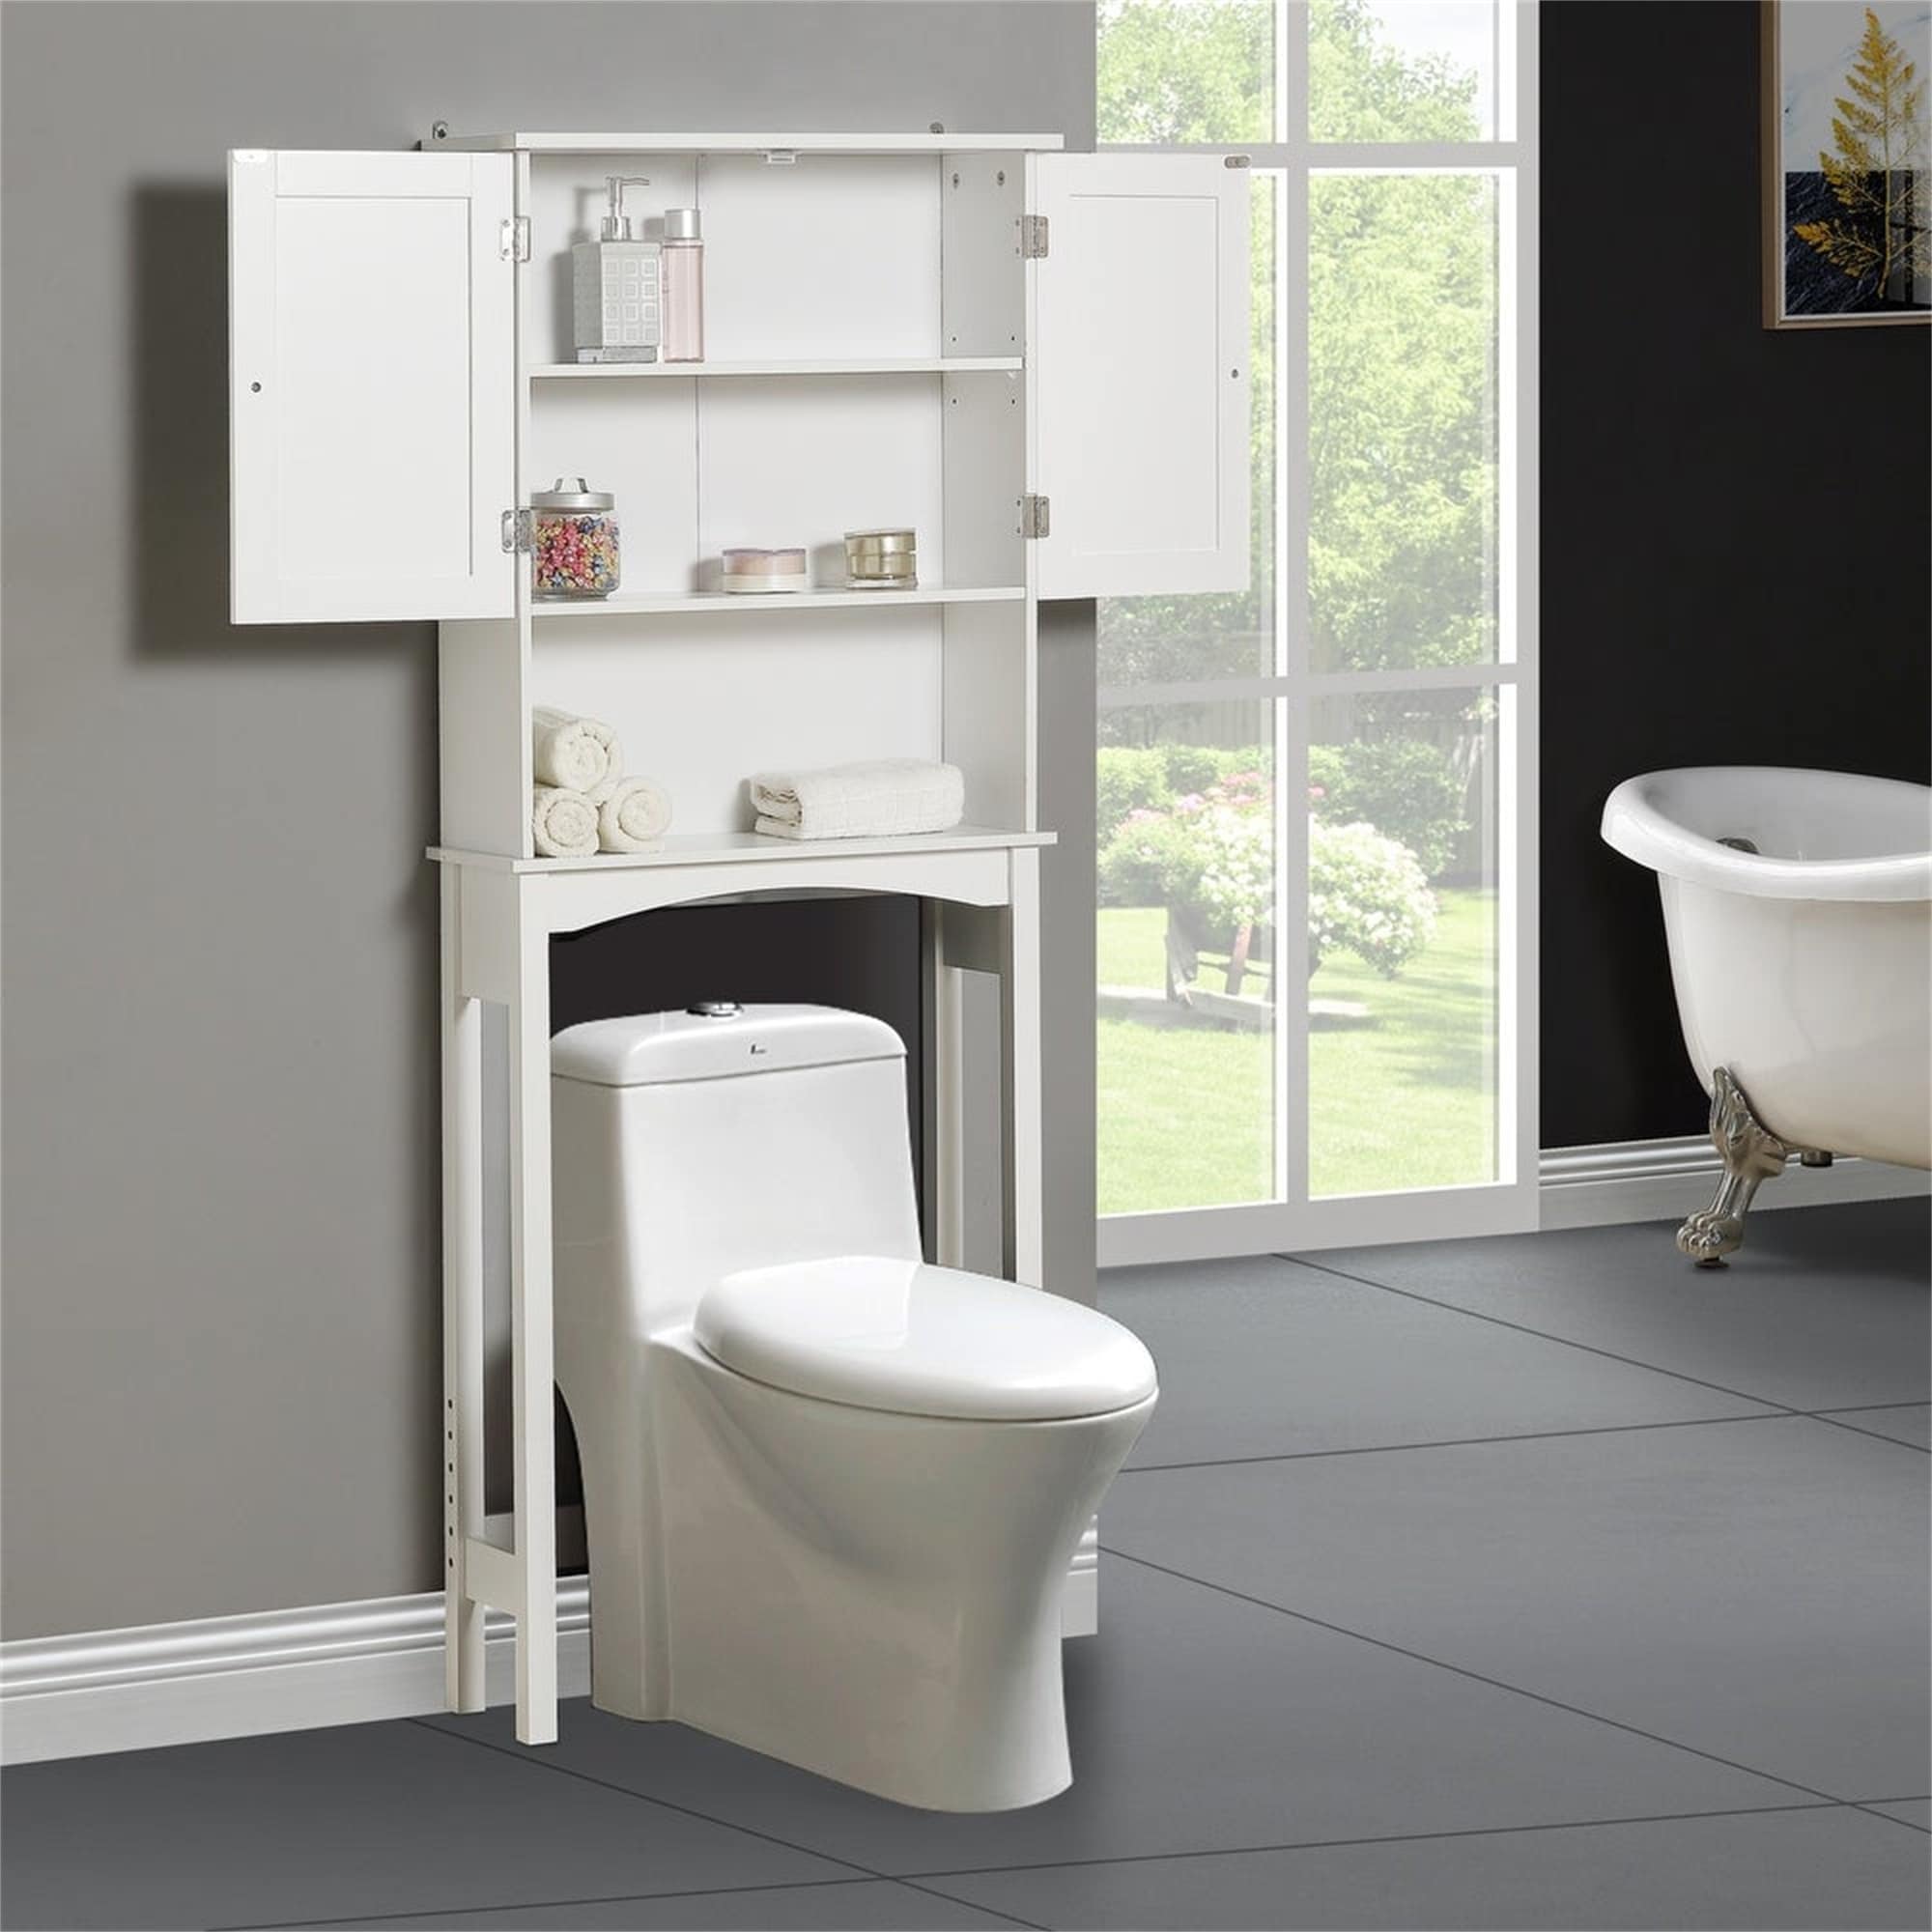 https://ak1.ostkcdn.com/images/products/is/images/direct/ded27483100a80b420b09e937e2458feb00b9ad1/Bathroom-Wooden-Storage-Cabinet-Over-The-Toilet--Adjustable-Shelf.jpg